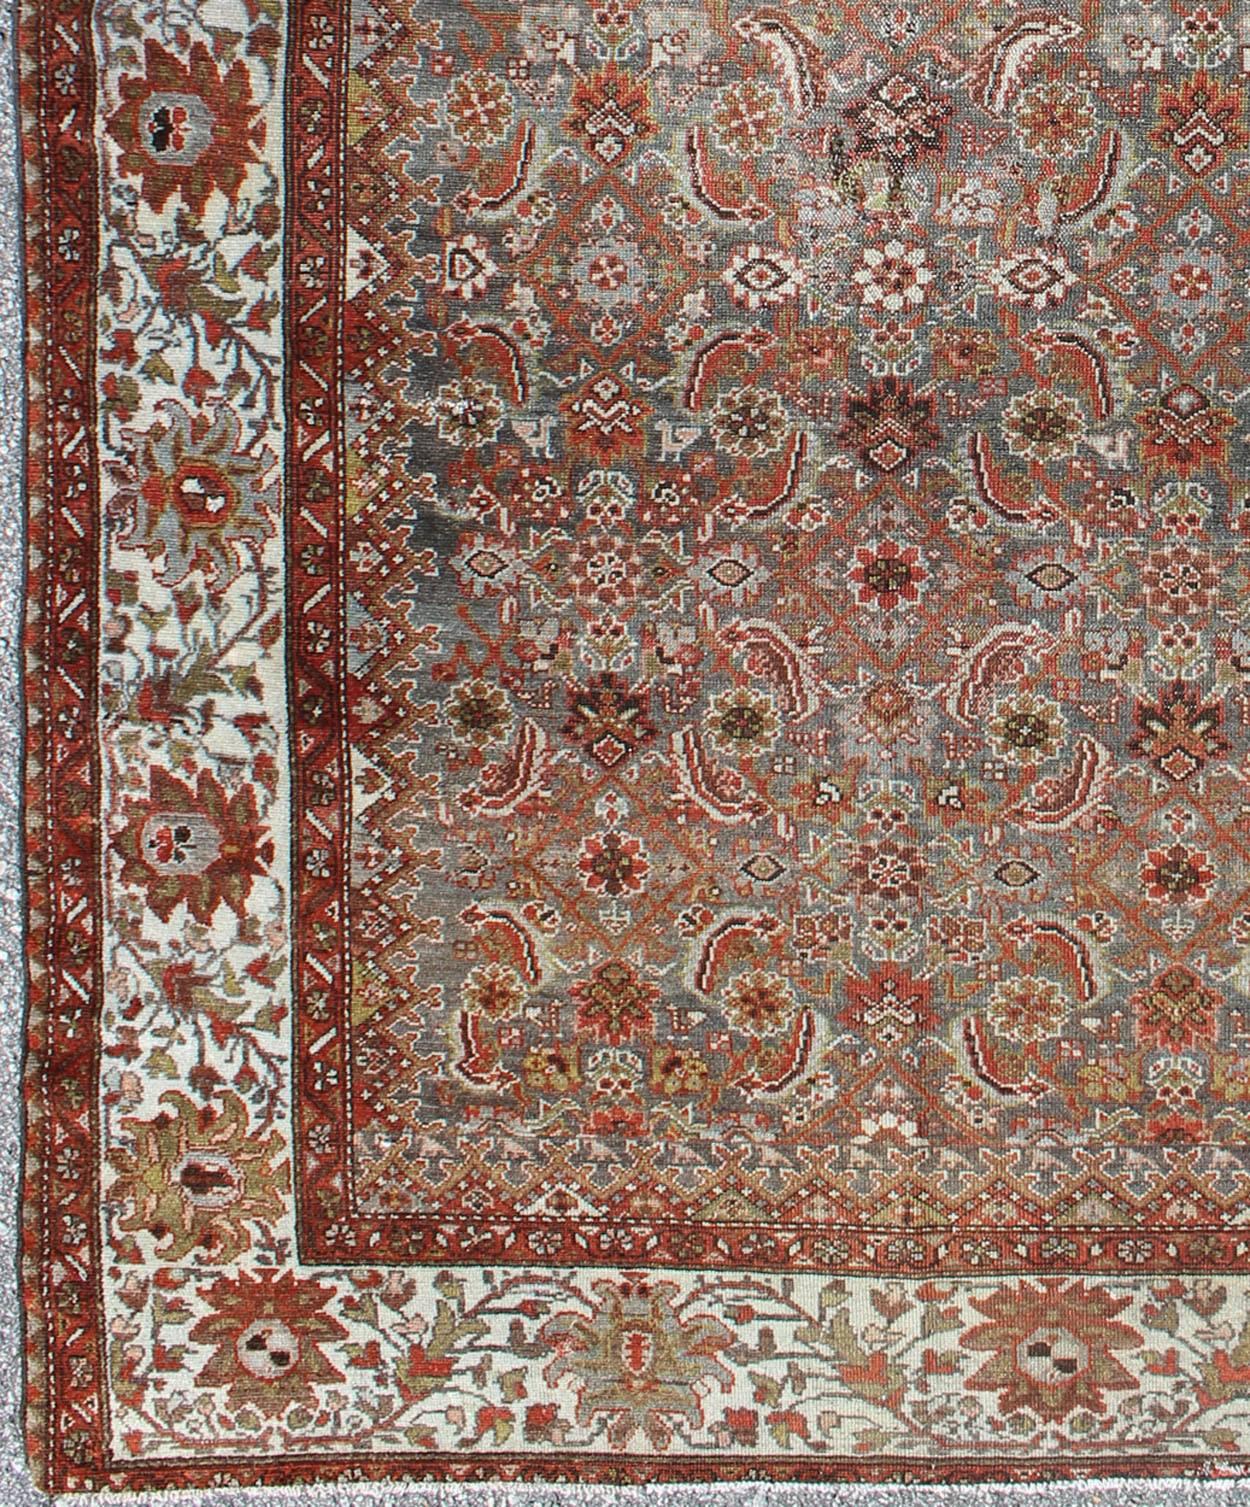 This magnificent antique Persian Malayer carpet bears a beautiful, all-over sub-geometric design paired with a delightful palette of various shades of light blue, deep red, and taupe. The central field is filled with a dazzling display of various